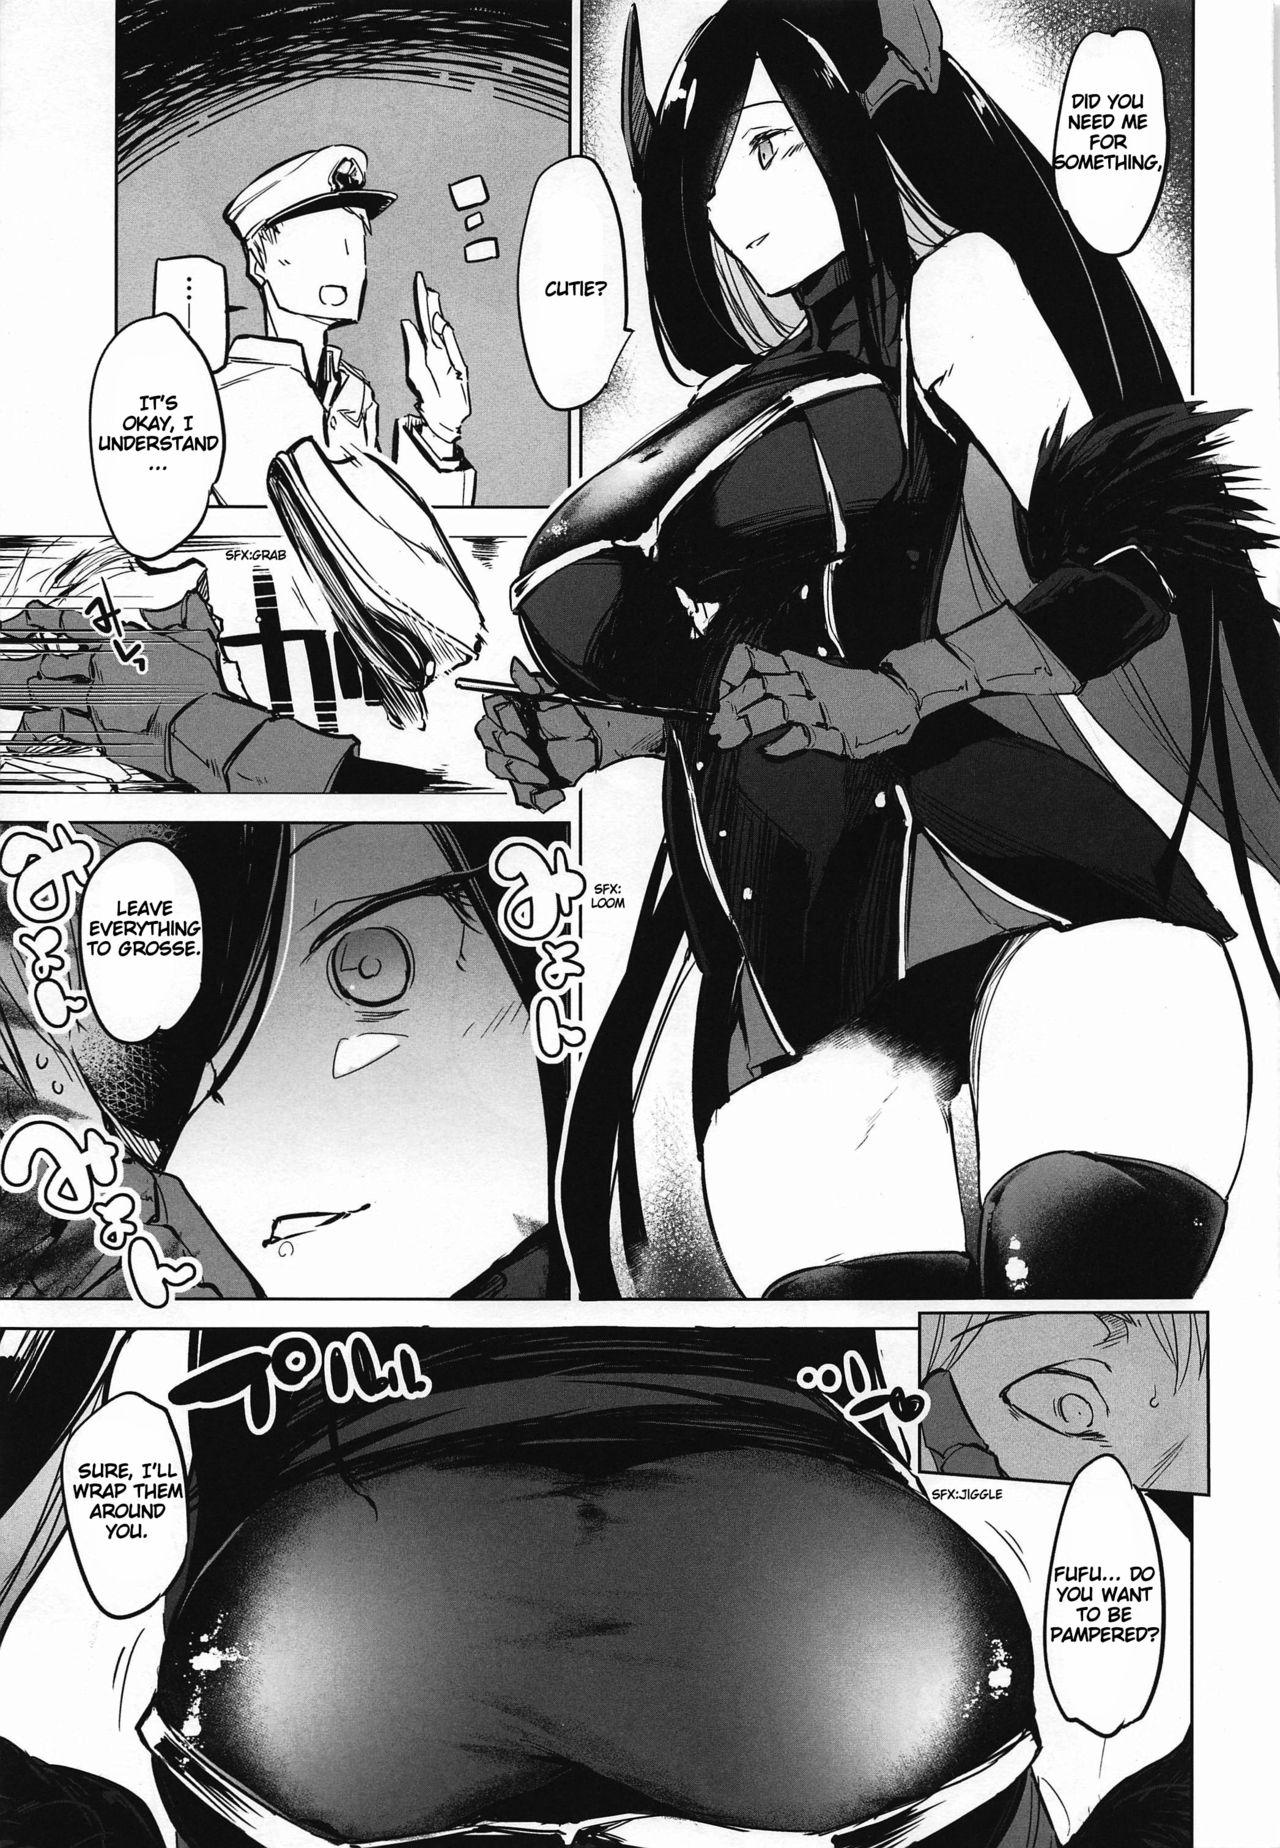 Hand Insufficient main force to shoot ! Iron-Blood Battleship and Battle Cruiser Summary Book - Azur lane French Porn - Page 12